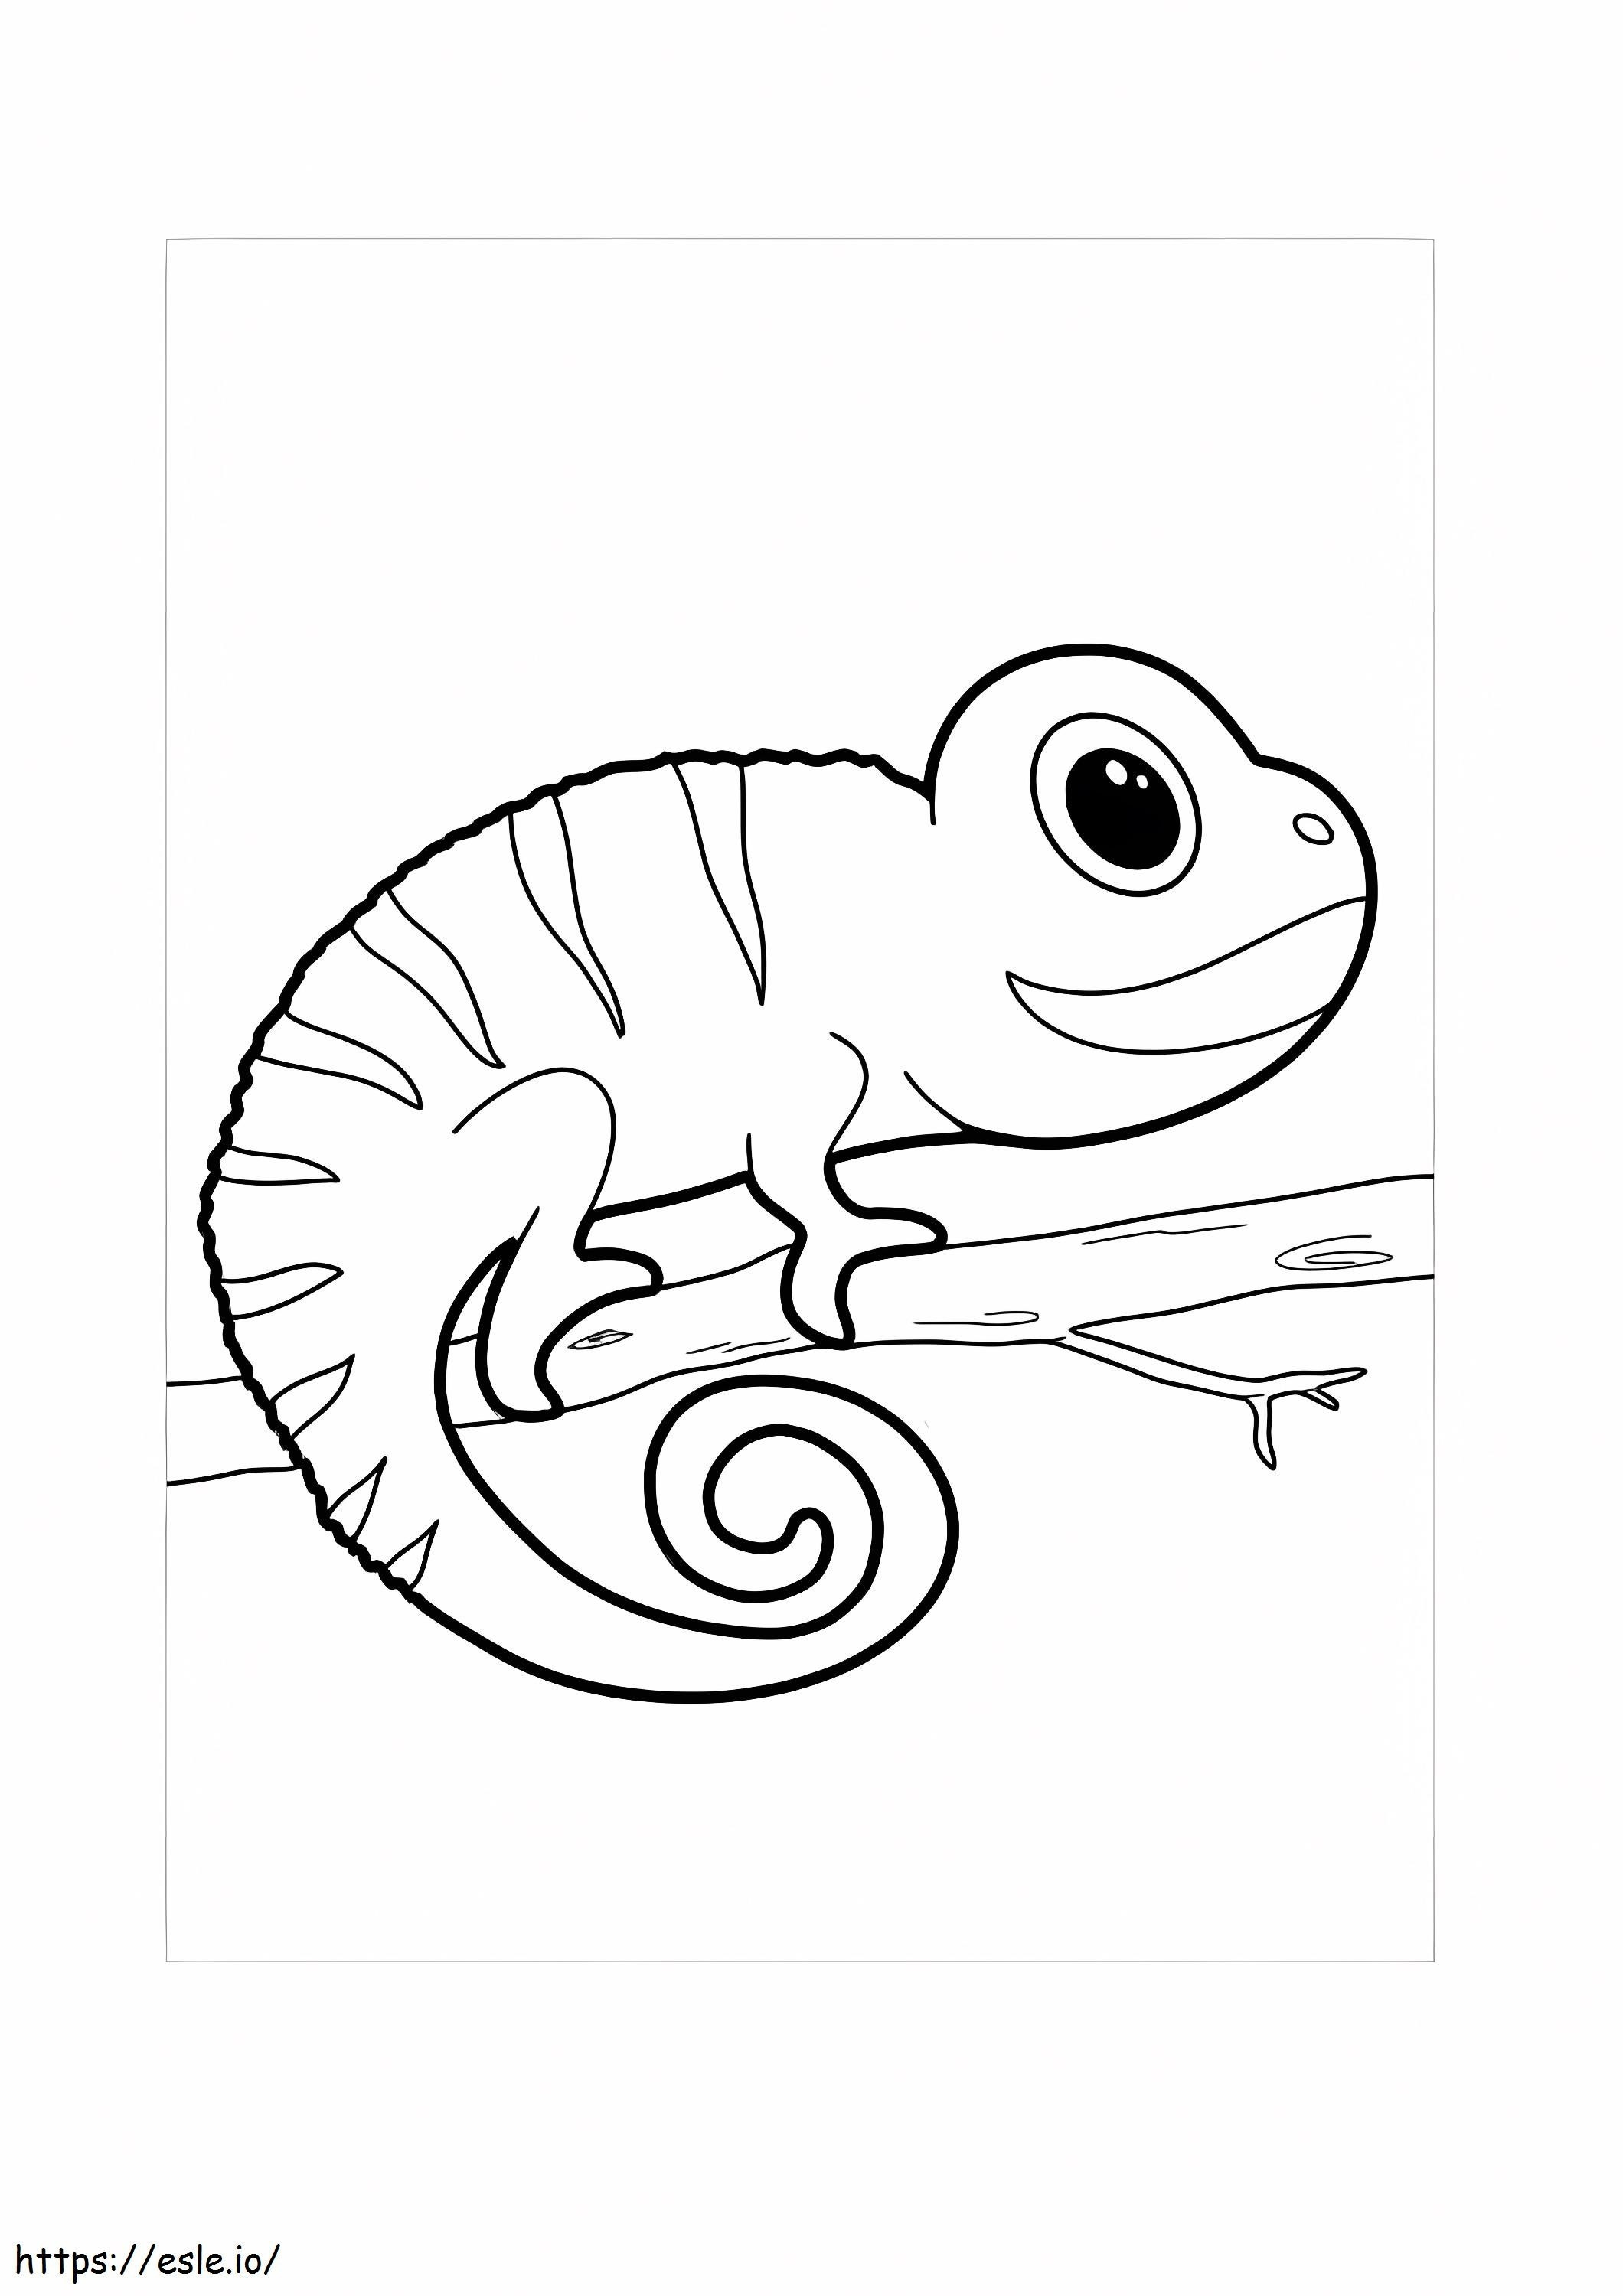 Baby Chameleon On Tree Branch coloring page